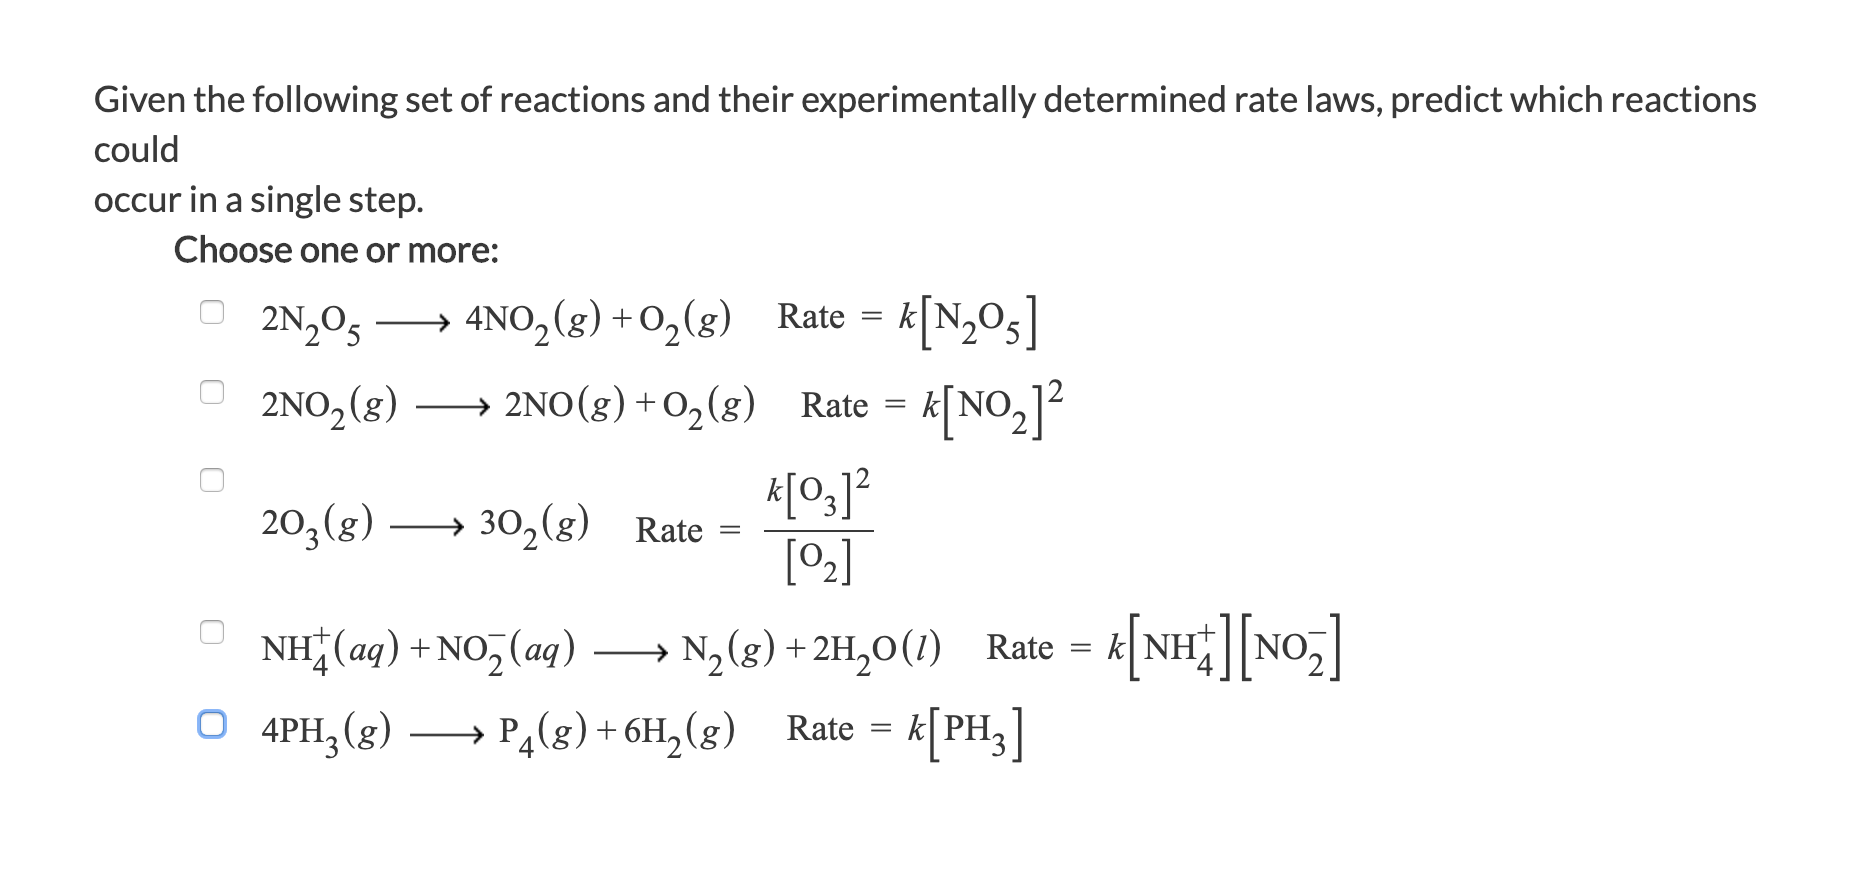 Given the following set of reactions and their experimentally determined rate laws, predict which reactions
could
occur in a single step.
Choose one or more:
O 2N,05
→
4NO,(g) + O,(g) Rate =
[N,Os]
2NO,(g)
→ 2NO(8) +0,(g) Rate = k[NO,]2
시%]2
> 30,(g) Rate =
[2]
203(g)
NH(aq) +NO, (aq)
N2(g) + 2H,0(1) Rate =
k[NHNO,
O 4PH;(g)
→ PĄ(g) + 6H, (g) Rate =
K[PH;]
